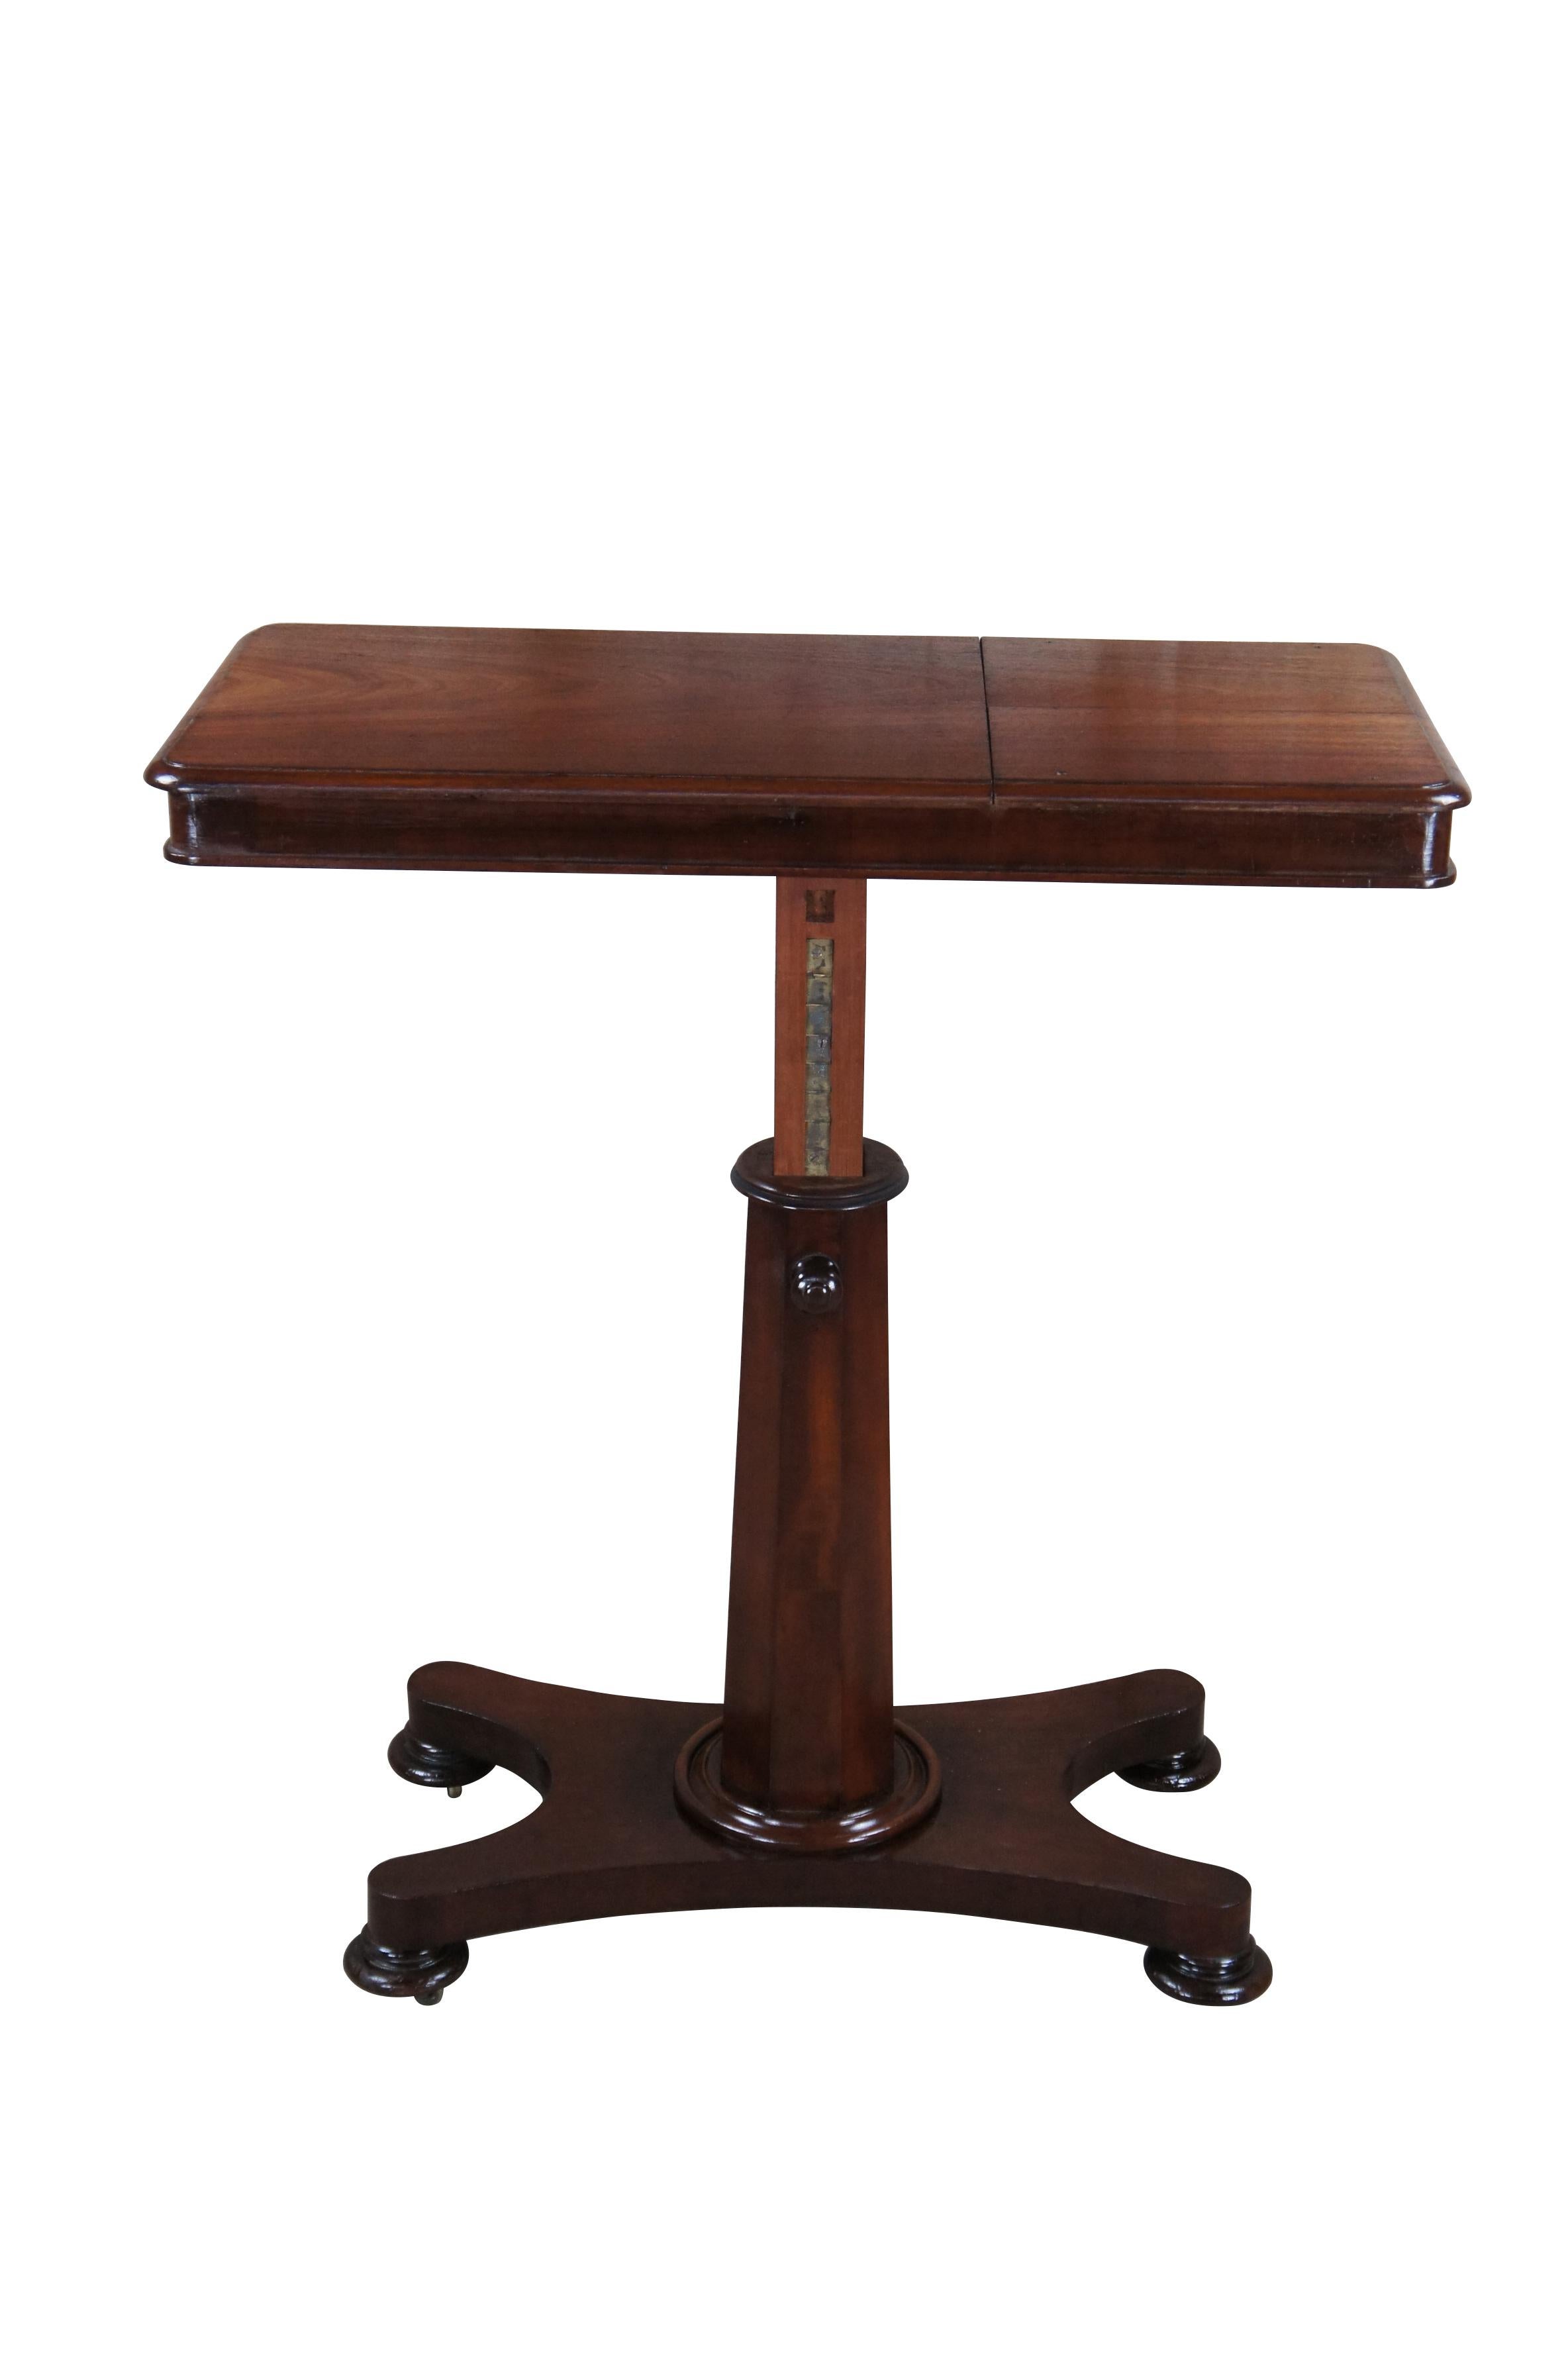 An impressive William IV era mahogany Invalids table.  Features a rectangular sliding top with a pair of ratcheted reading slopes to one side, over an adjustable octagonal stem above a shaped quadripartite base over flared bun feet with metal